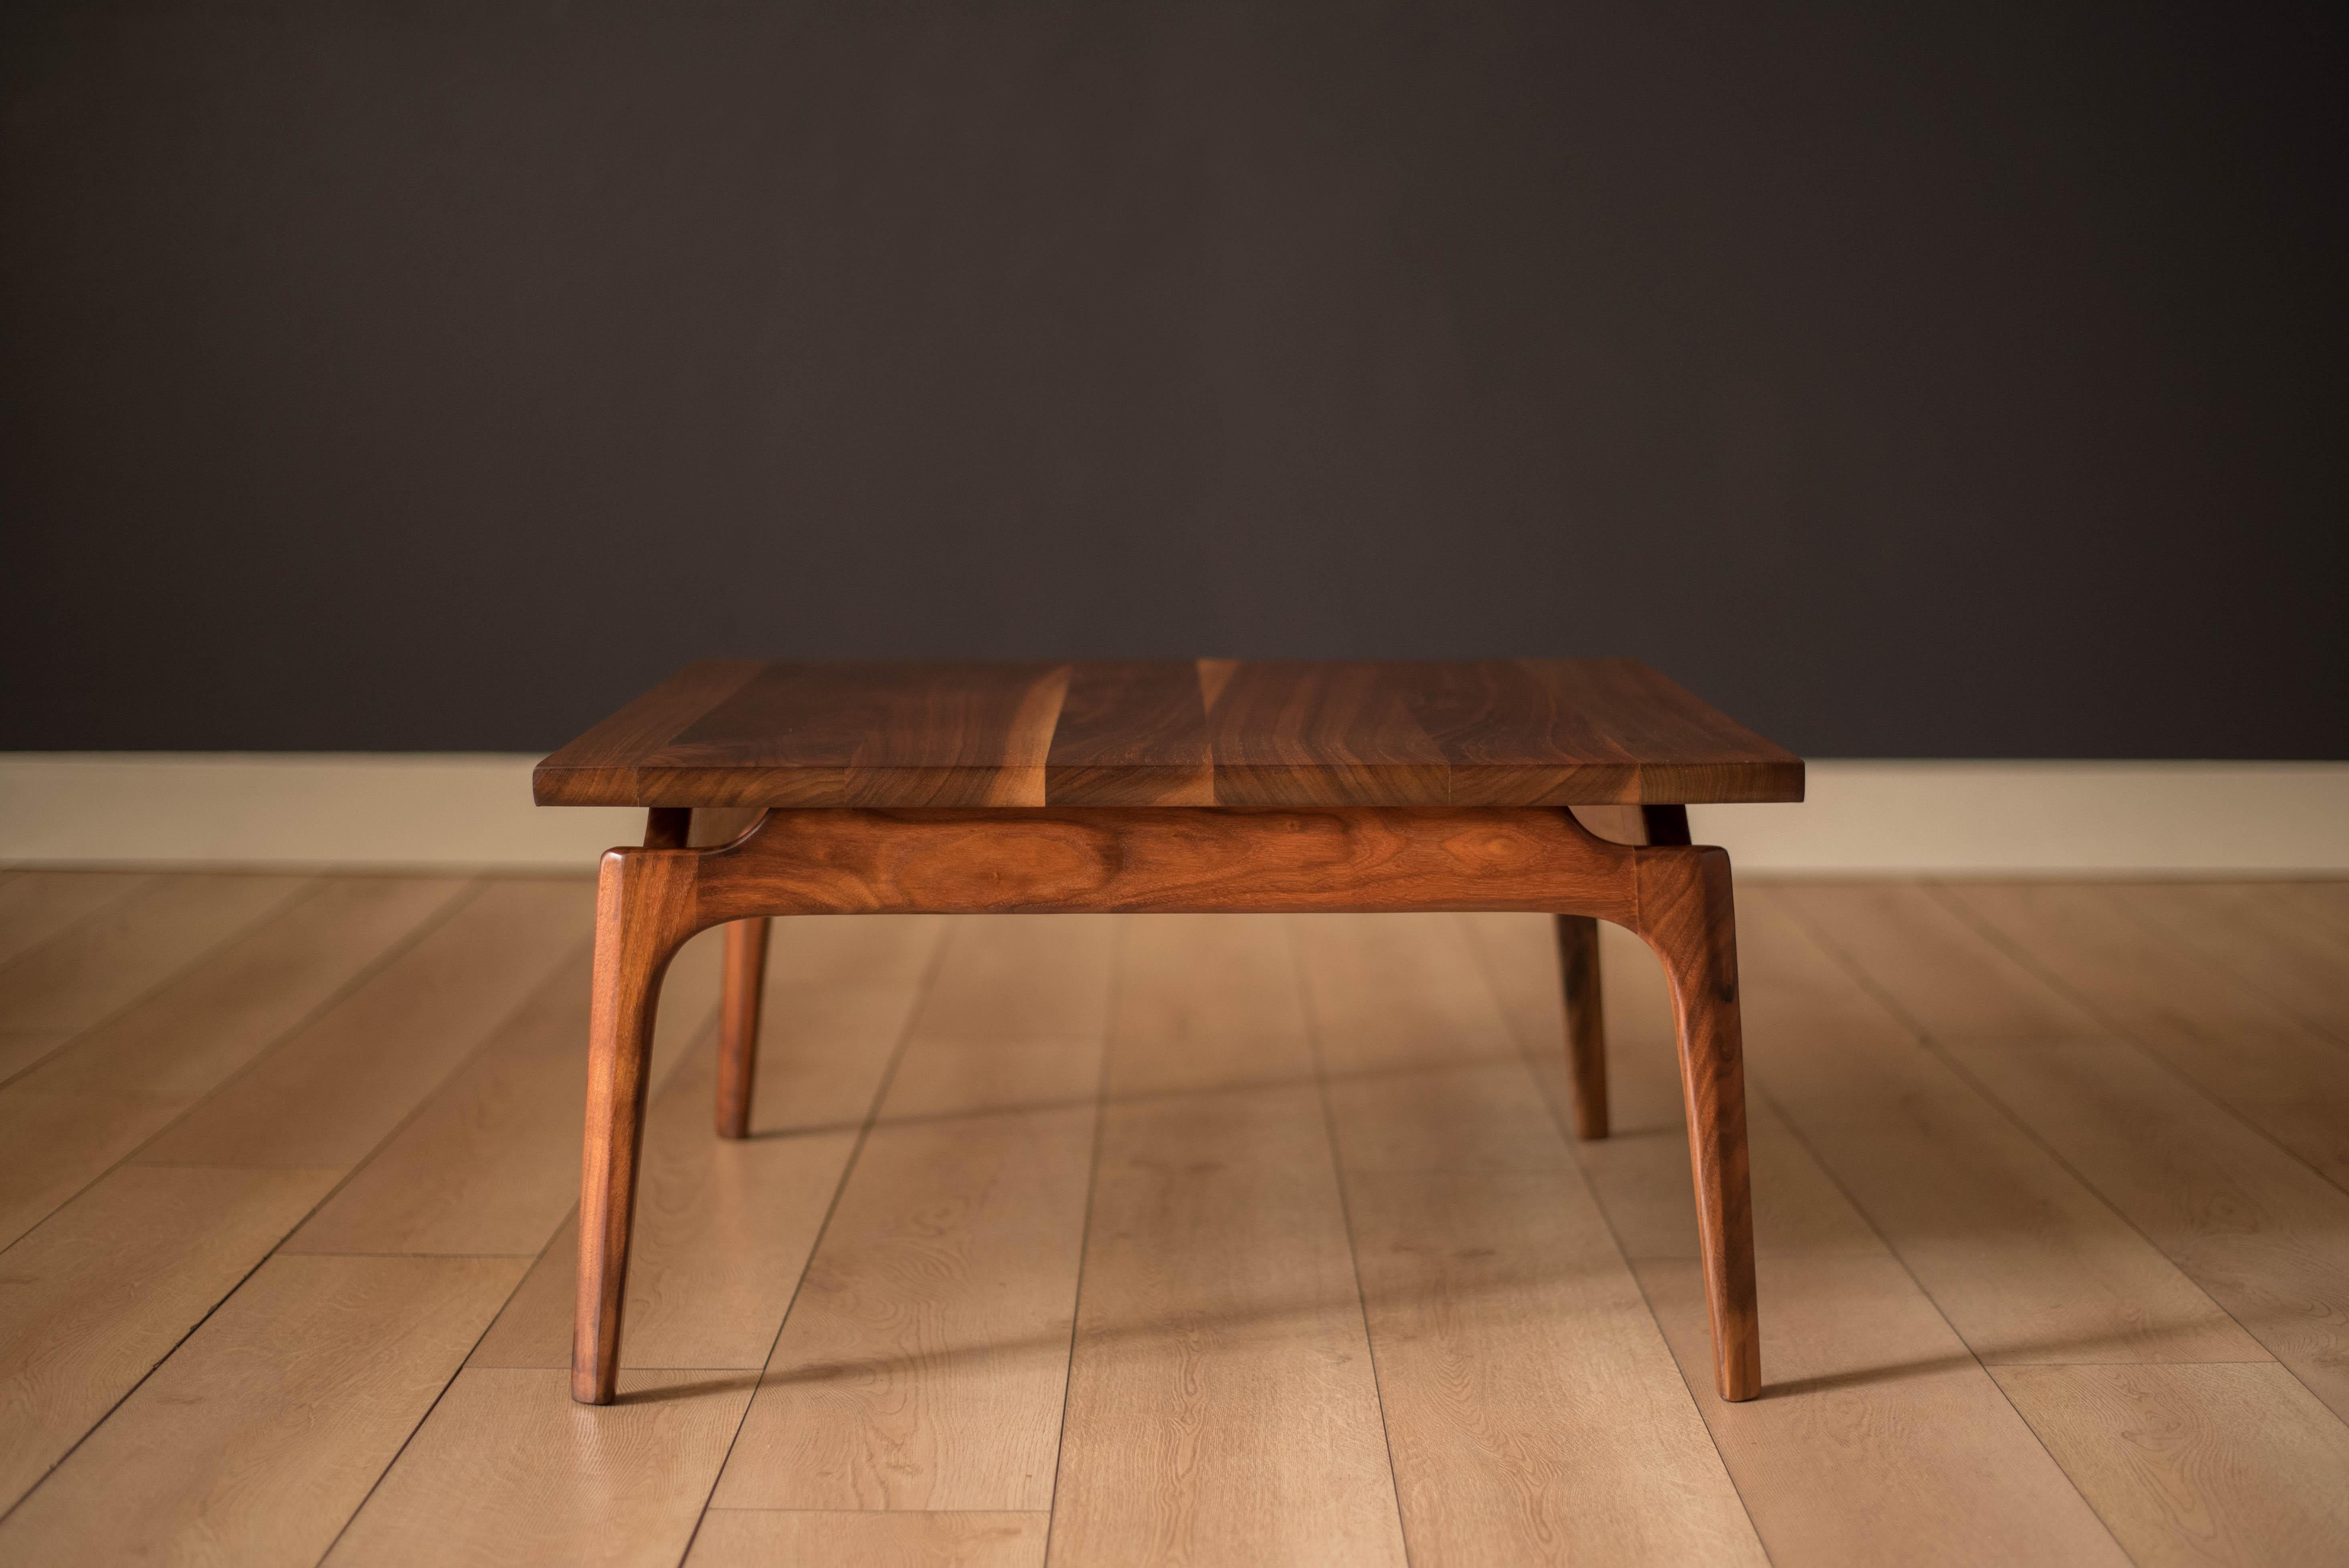 Vintage coffee or occasional table in solid planked walnut, circa 1960s. Features a floating tabletop design supported by contoured sculpted legs.





Offered by Mid Century Maddist